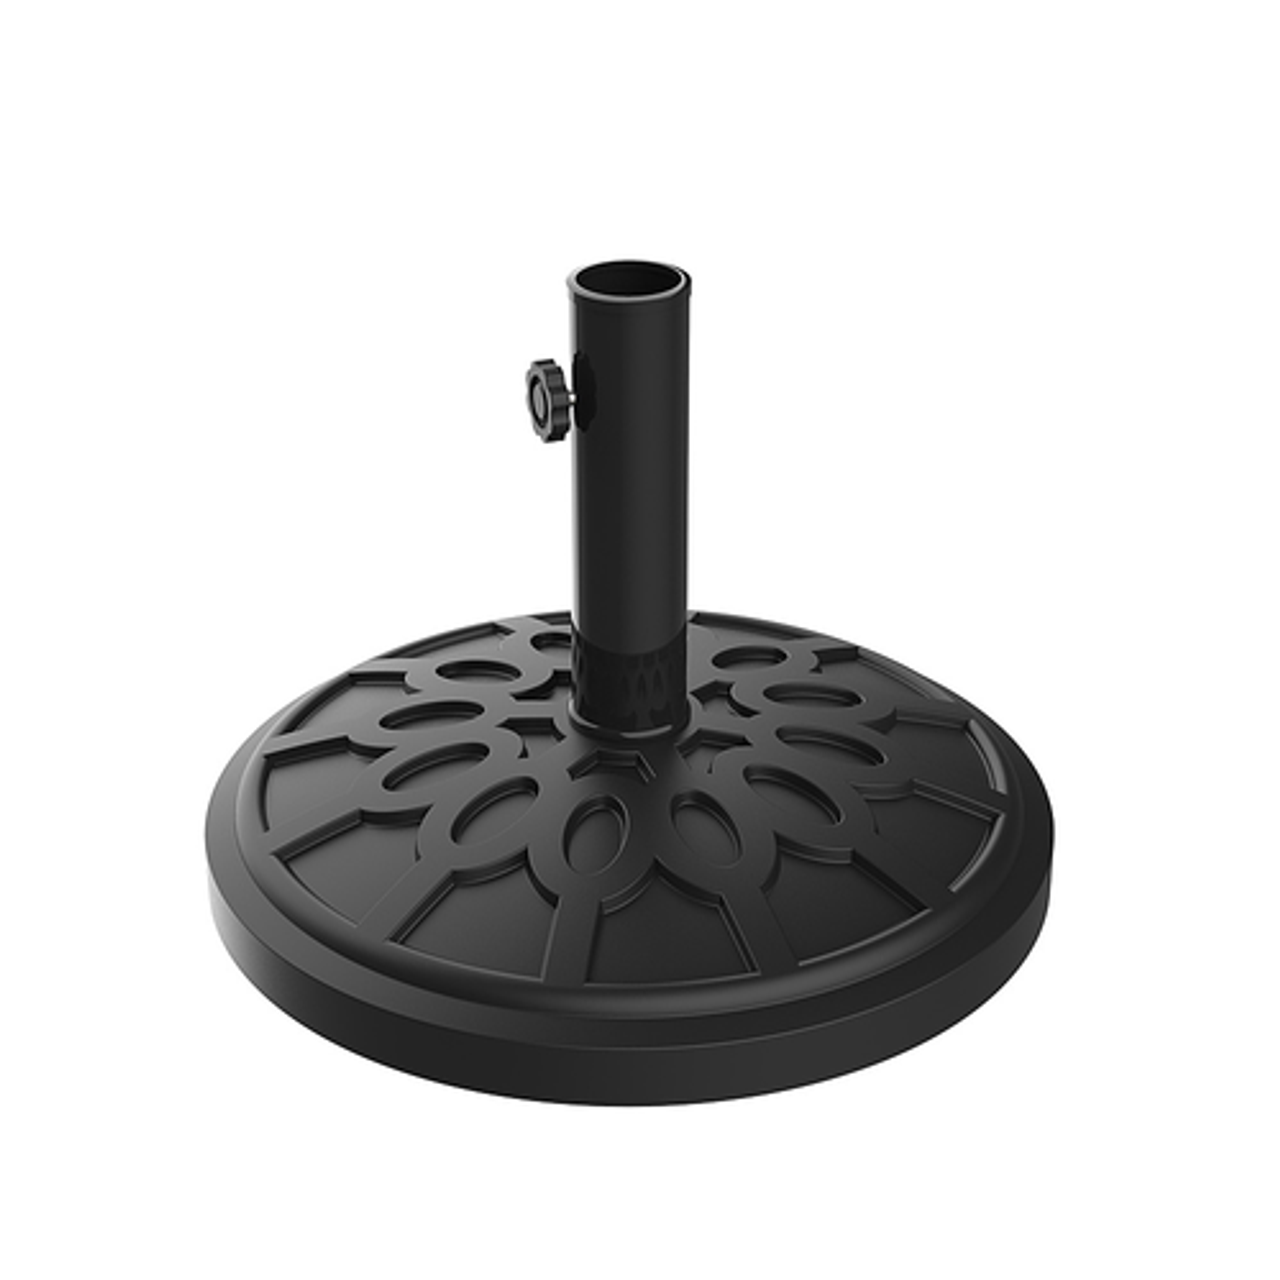 Outdoor Patio Umbrella Base Stand for Table, Tilt, and Freestanding Umbrellas by Nature Spring - Black